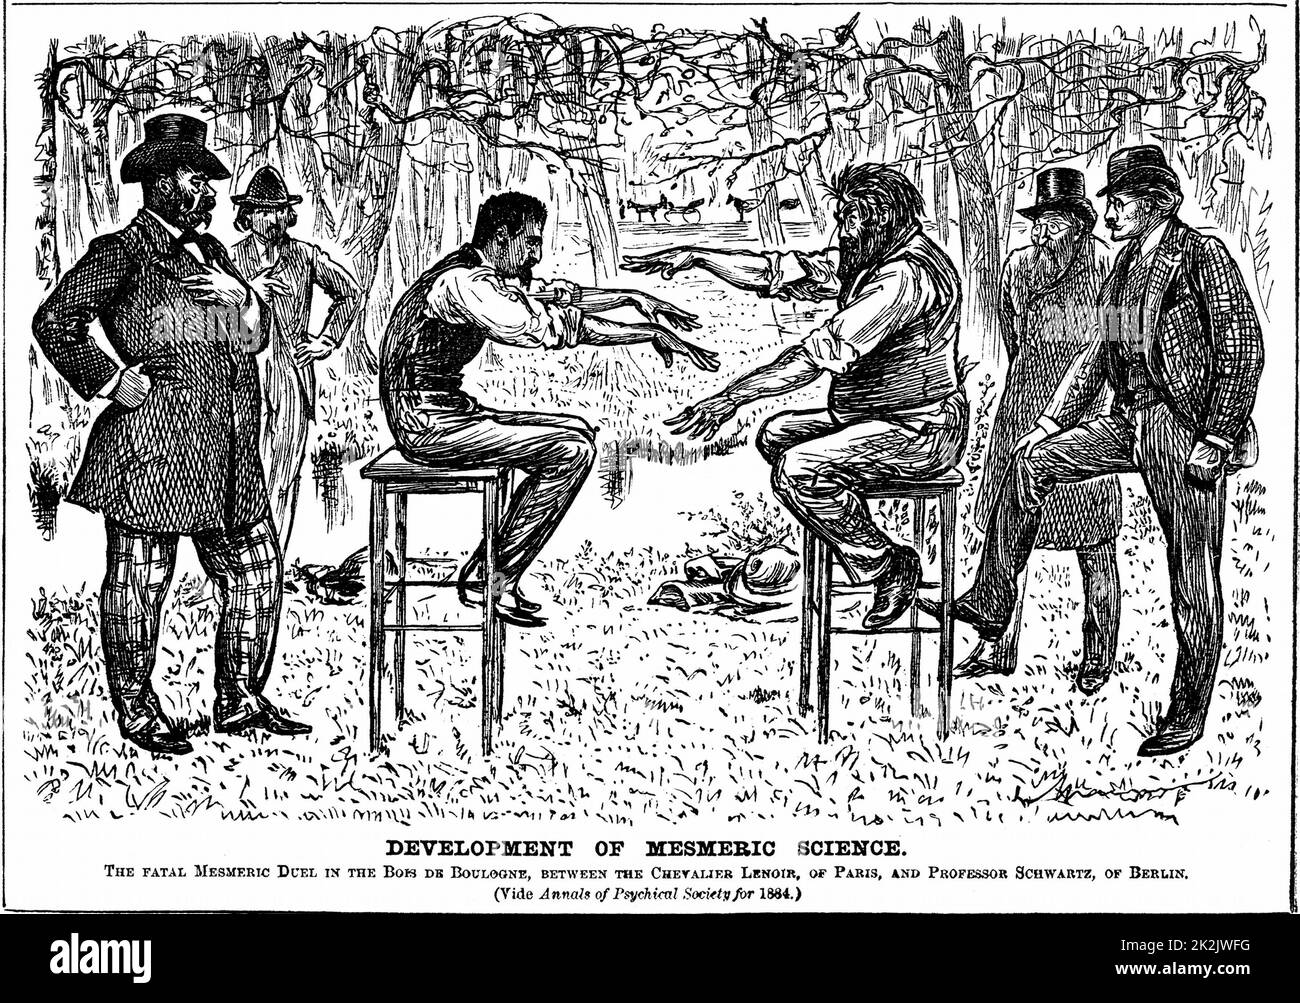 George du Maurier cartoon on the revival of Mesmerism. From 'Punch', London, 4 December 1883. Stock Photo